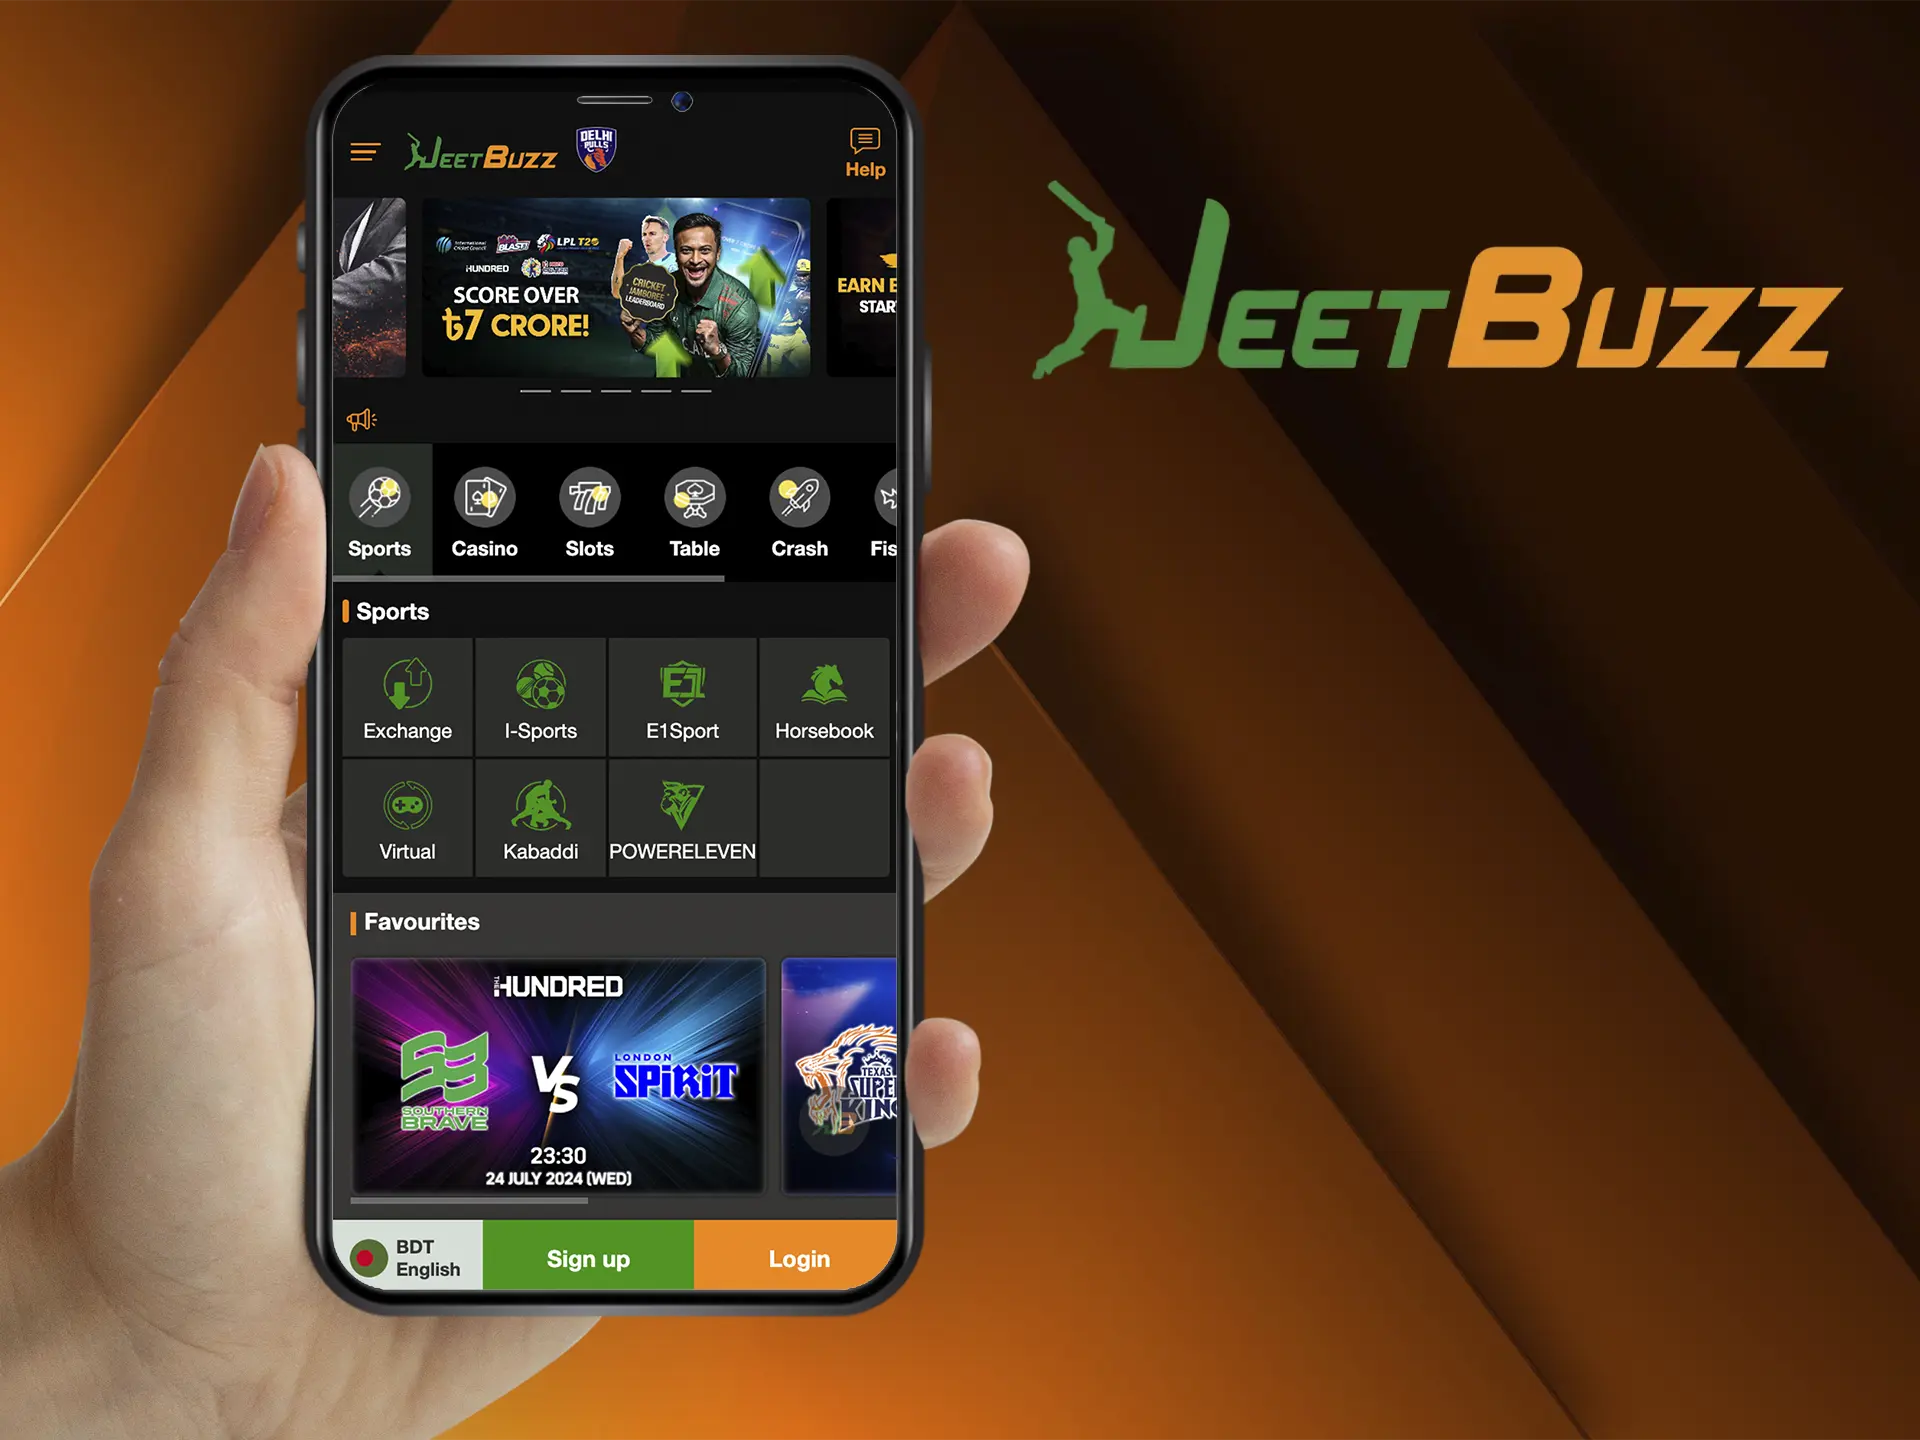 Learn how to properly use the JeetBuzz app and what its benefits are.